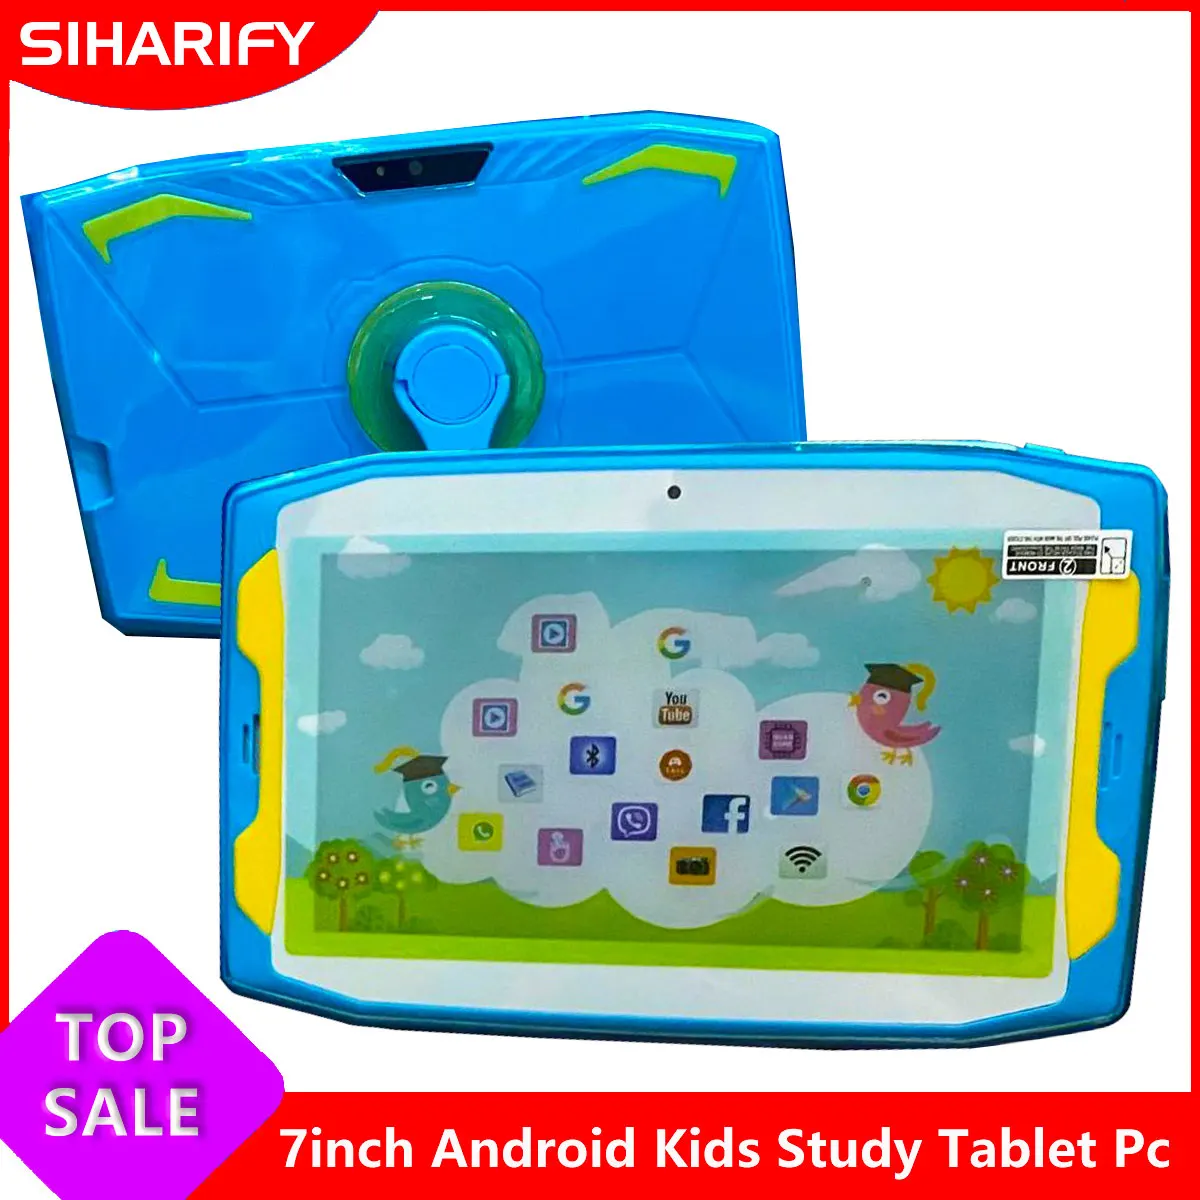 7-kids-android-11-tablet-4gb-ram-64gb-rom-quad-core-wifi-google-play-children-for-kiddies-educational-gift-study-case-tablet-pc